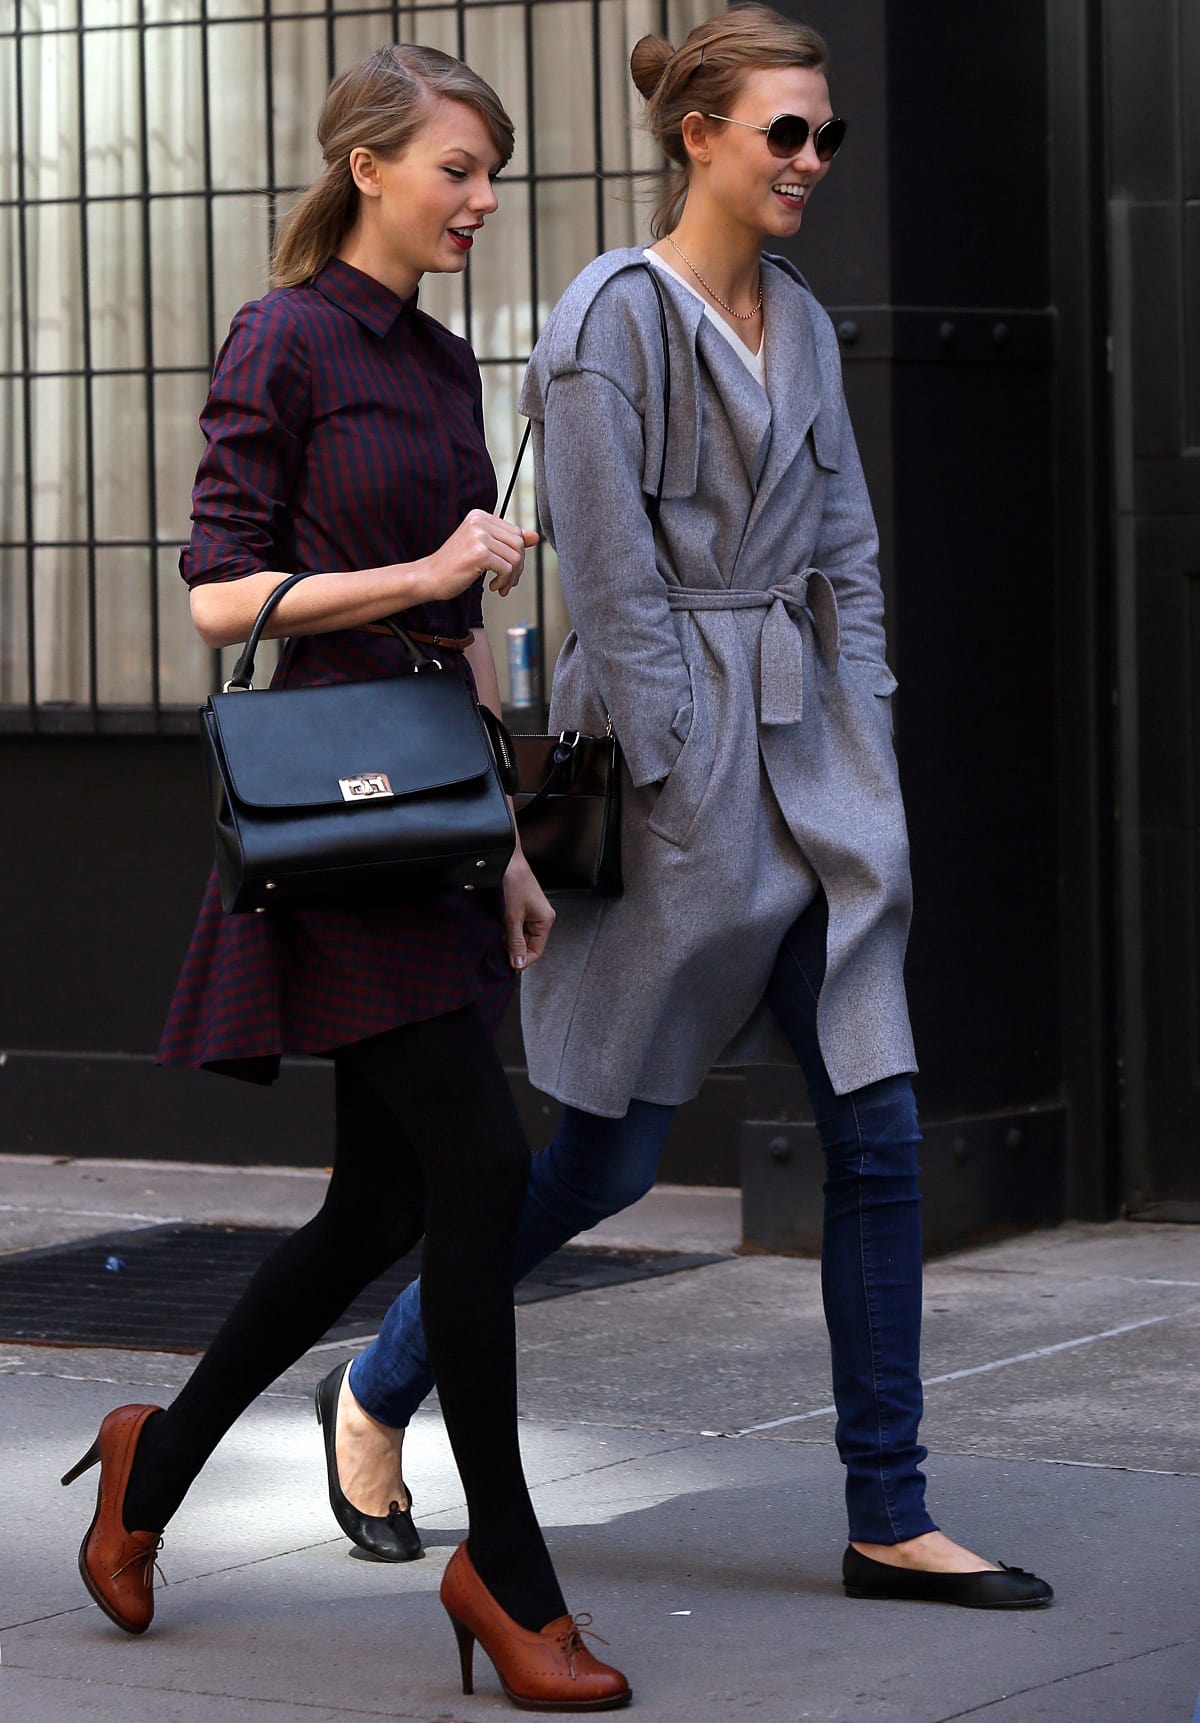 Taylor Swift and Karlie Kloss, who had a highly-publicized friendship that resulted in an ill-fated relationship, were seen taking a stroll together in New York City